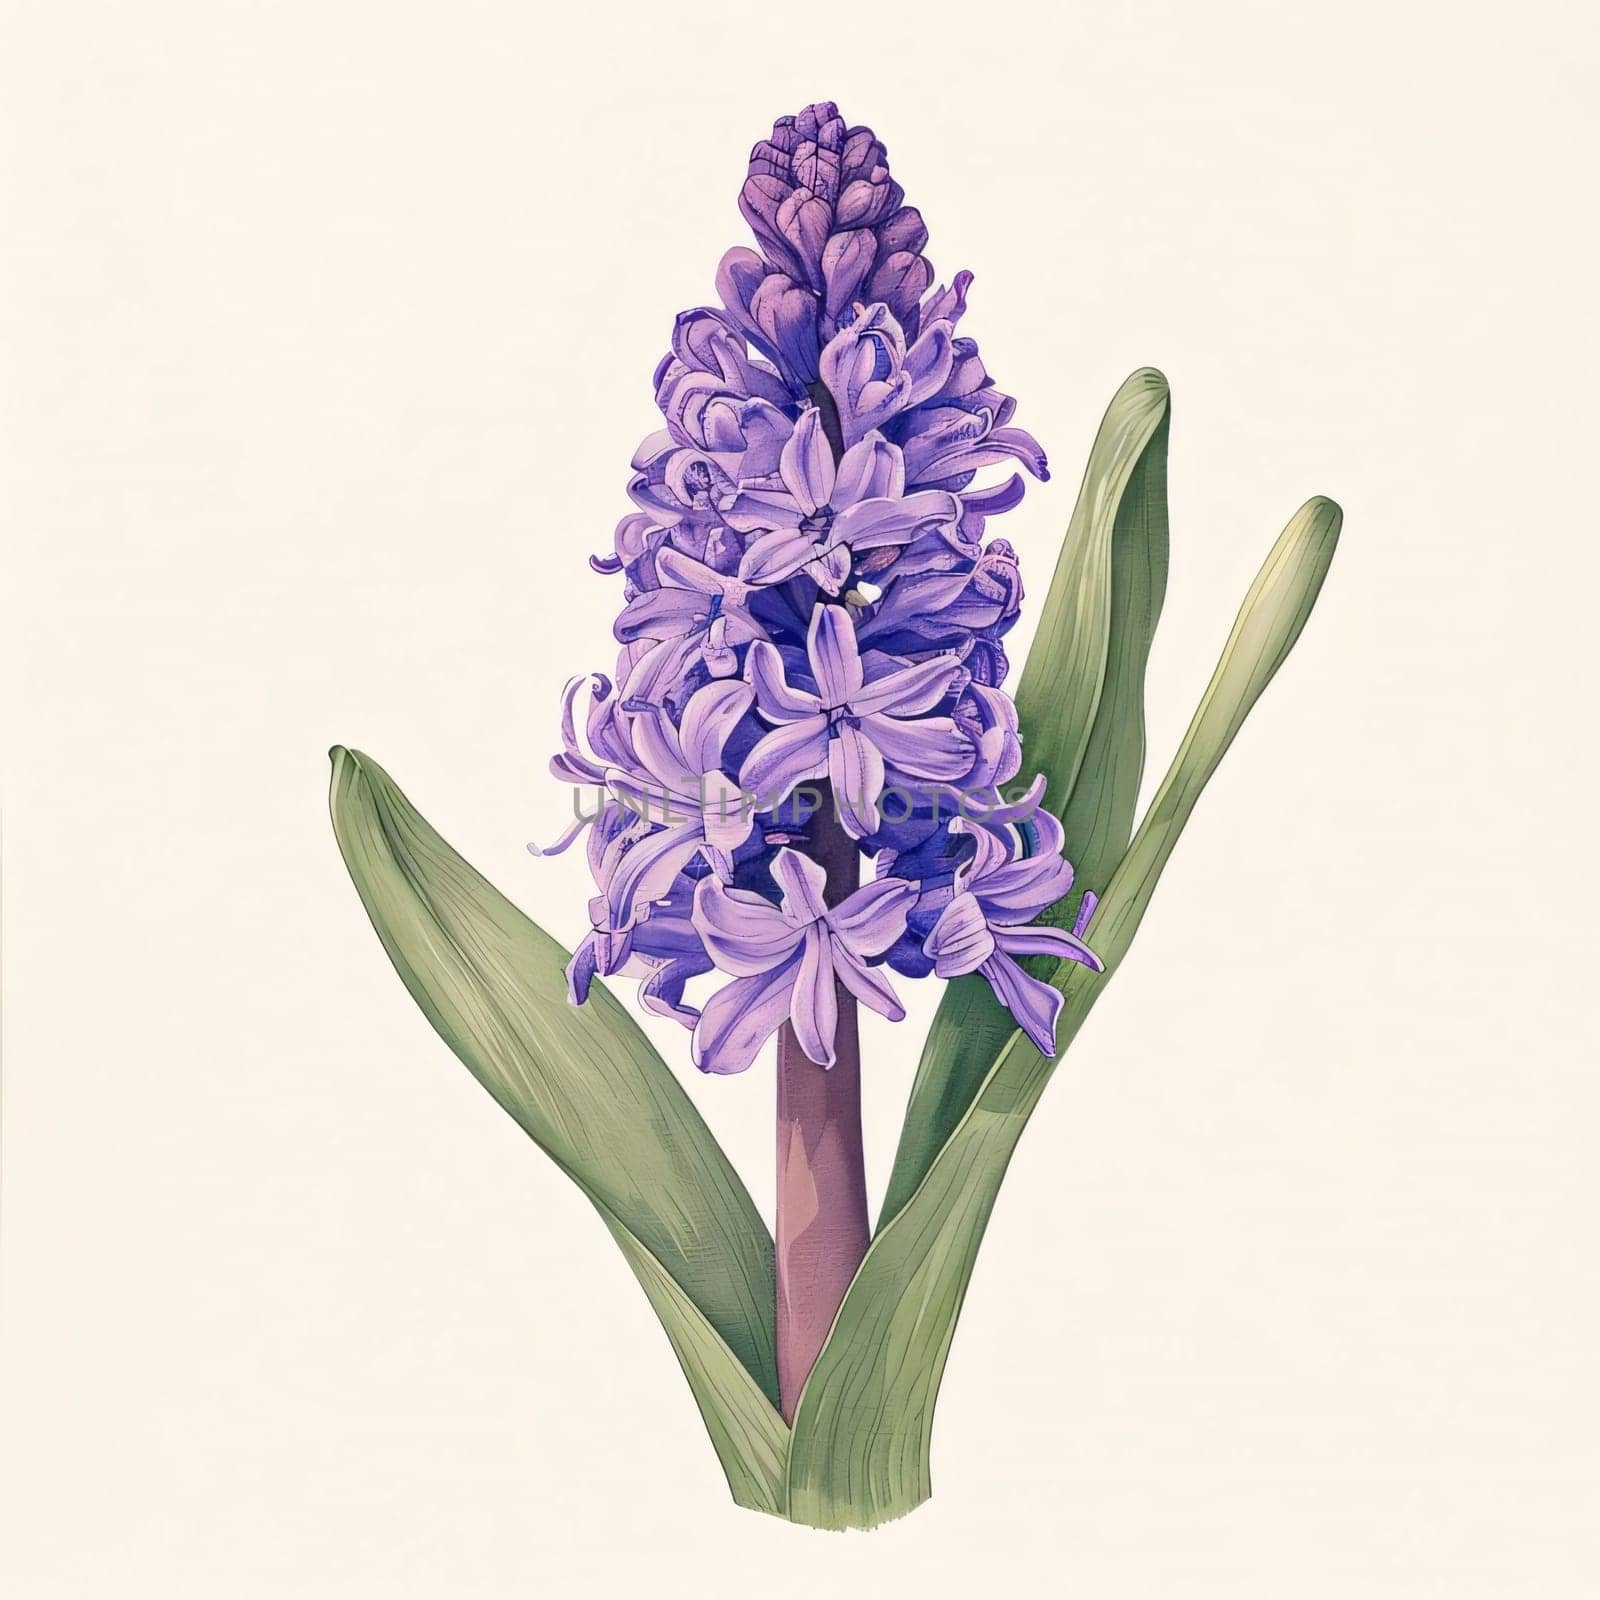 Drawn, painted flowers: purple hyacinth flower with green stem and leaves. Flowering flowers, a symbol of spring, new life. by ThemesS